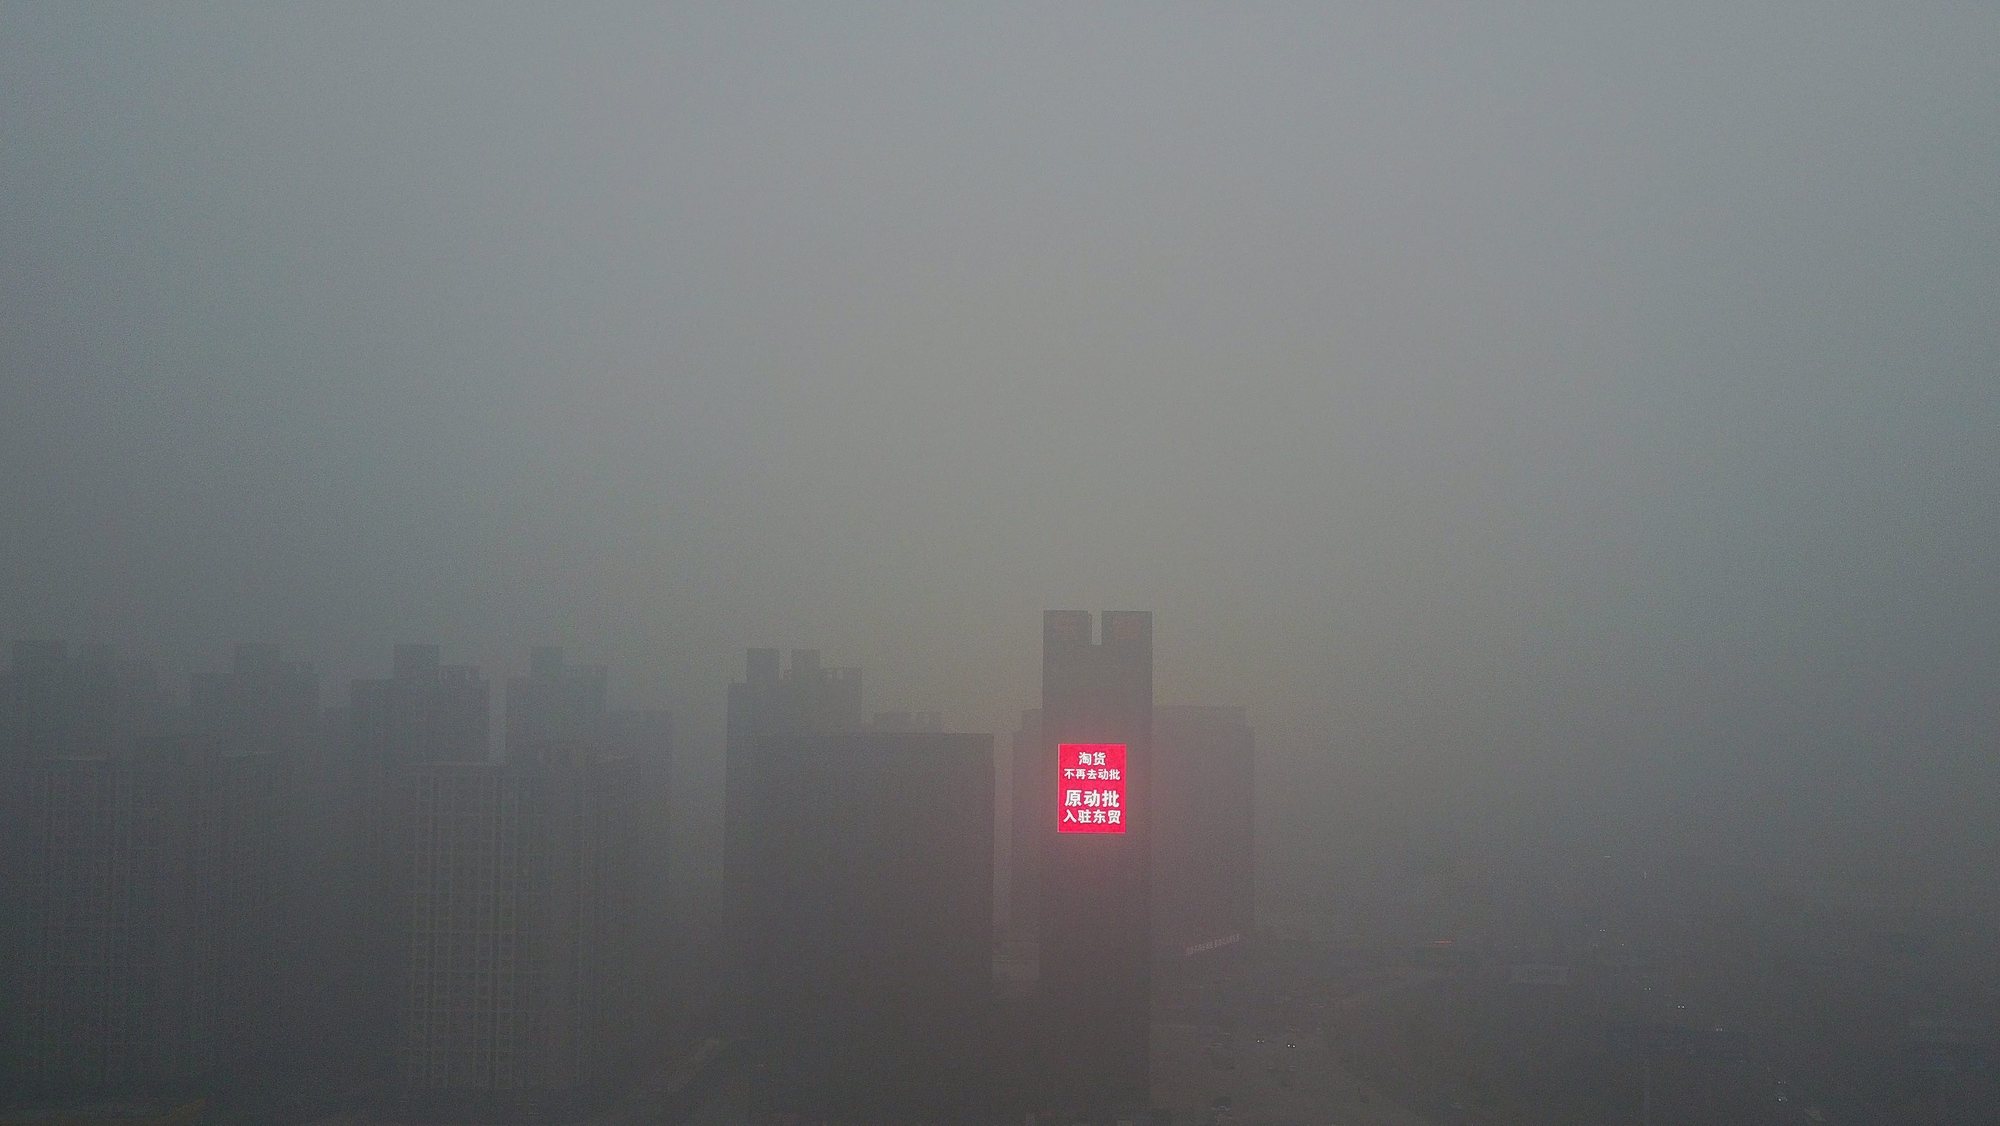 epa05698737 Buildings are shrouded in smog in the Yanjiao district of Sanhe, Hebei province, China, 05 January 2017. Heavy smog continues to affect vast areas of China with visibility said to be less than 200 meters in areas that included the cities of Beijing and Tianjin, and the provinces of Hebei, Henan, Shandong, Anhui, Jiangsu and Shanxi.  EPA/HOW HWEE YOUNG